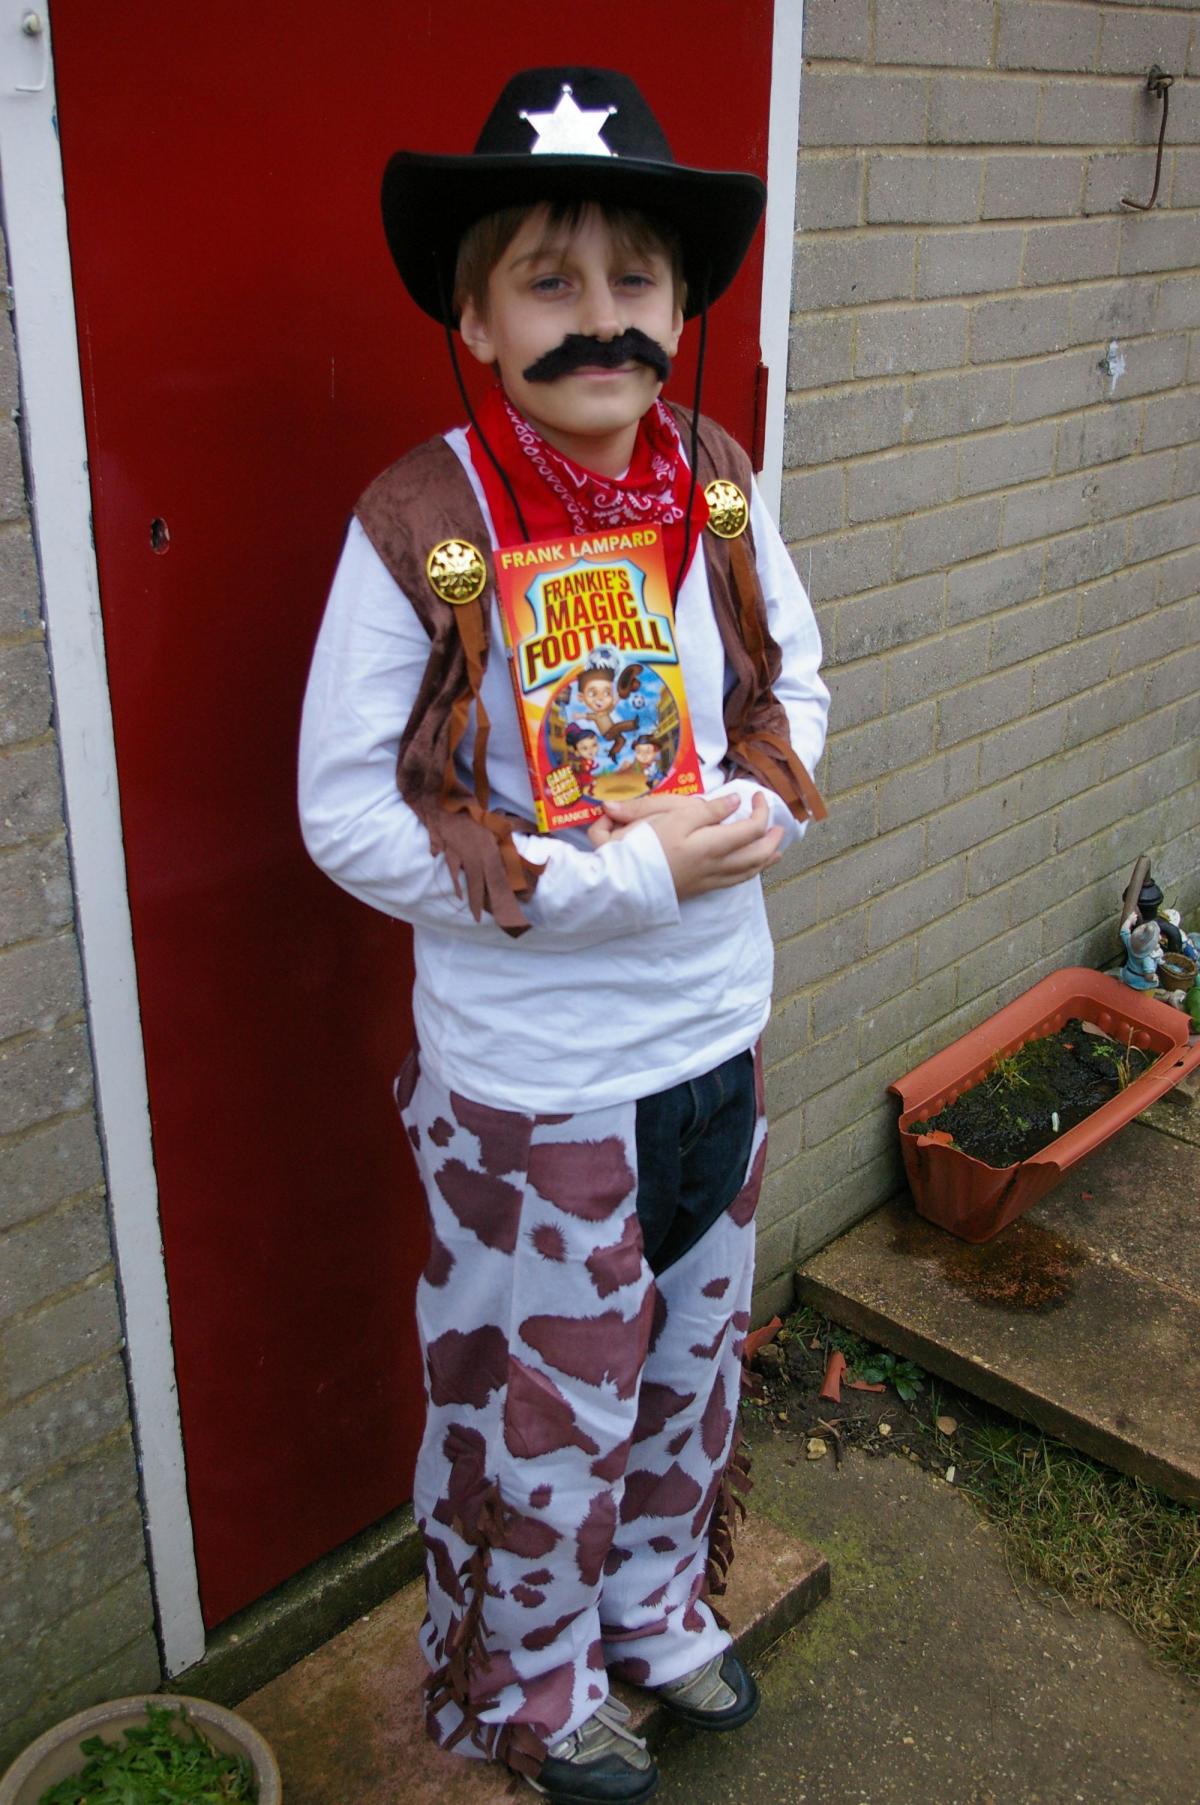 Jamie aged 9 is the sheriff from Frankie and the magic football - Frankie verses the cowboy crew.